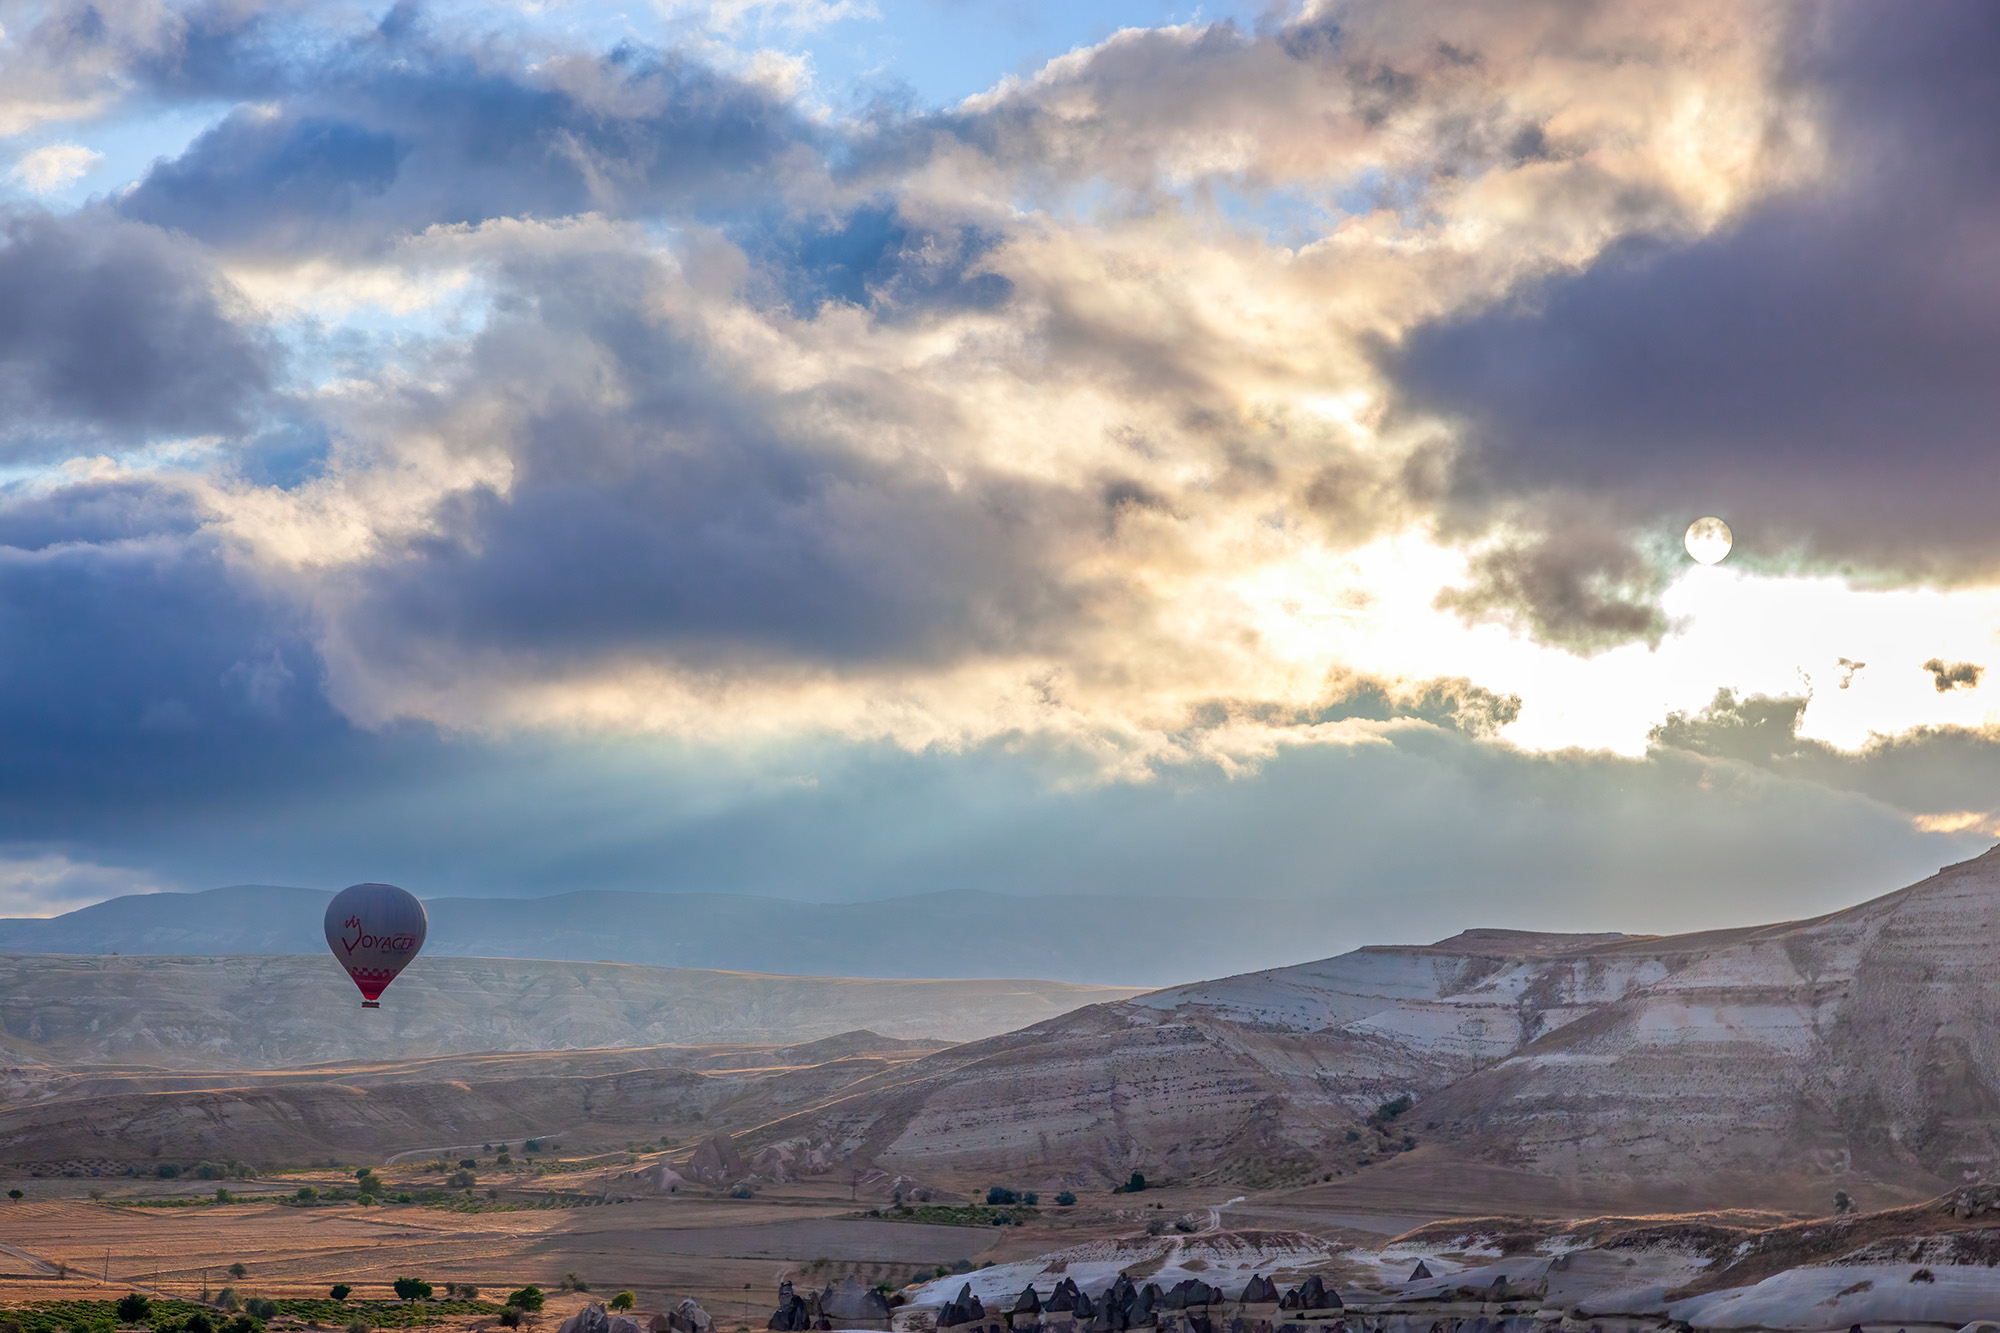 In this image, a hot air balloon rises into the sky above Cappadocia, Turkey, embracing the radiant embrace of the sunrise. The...